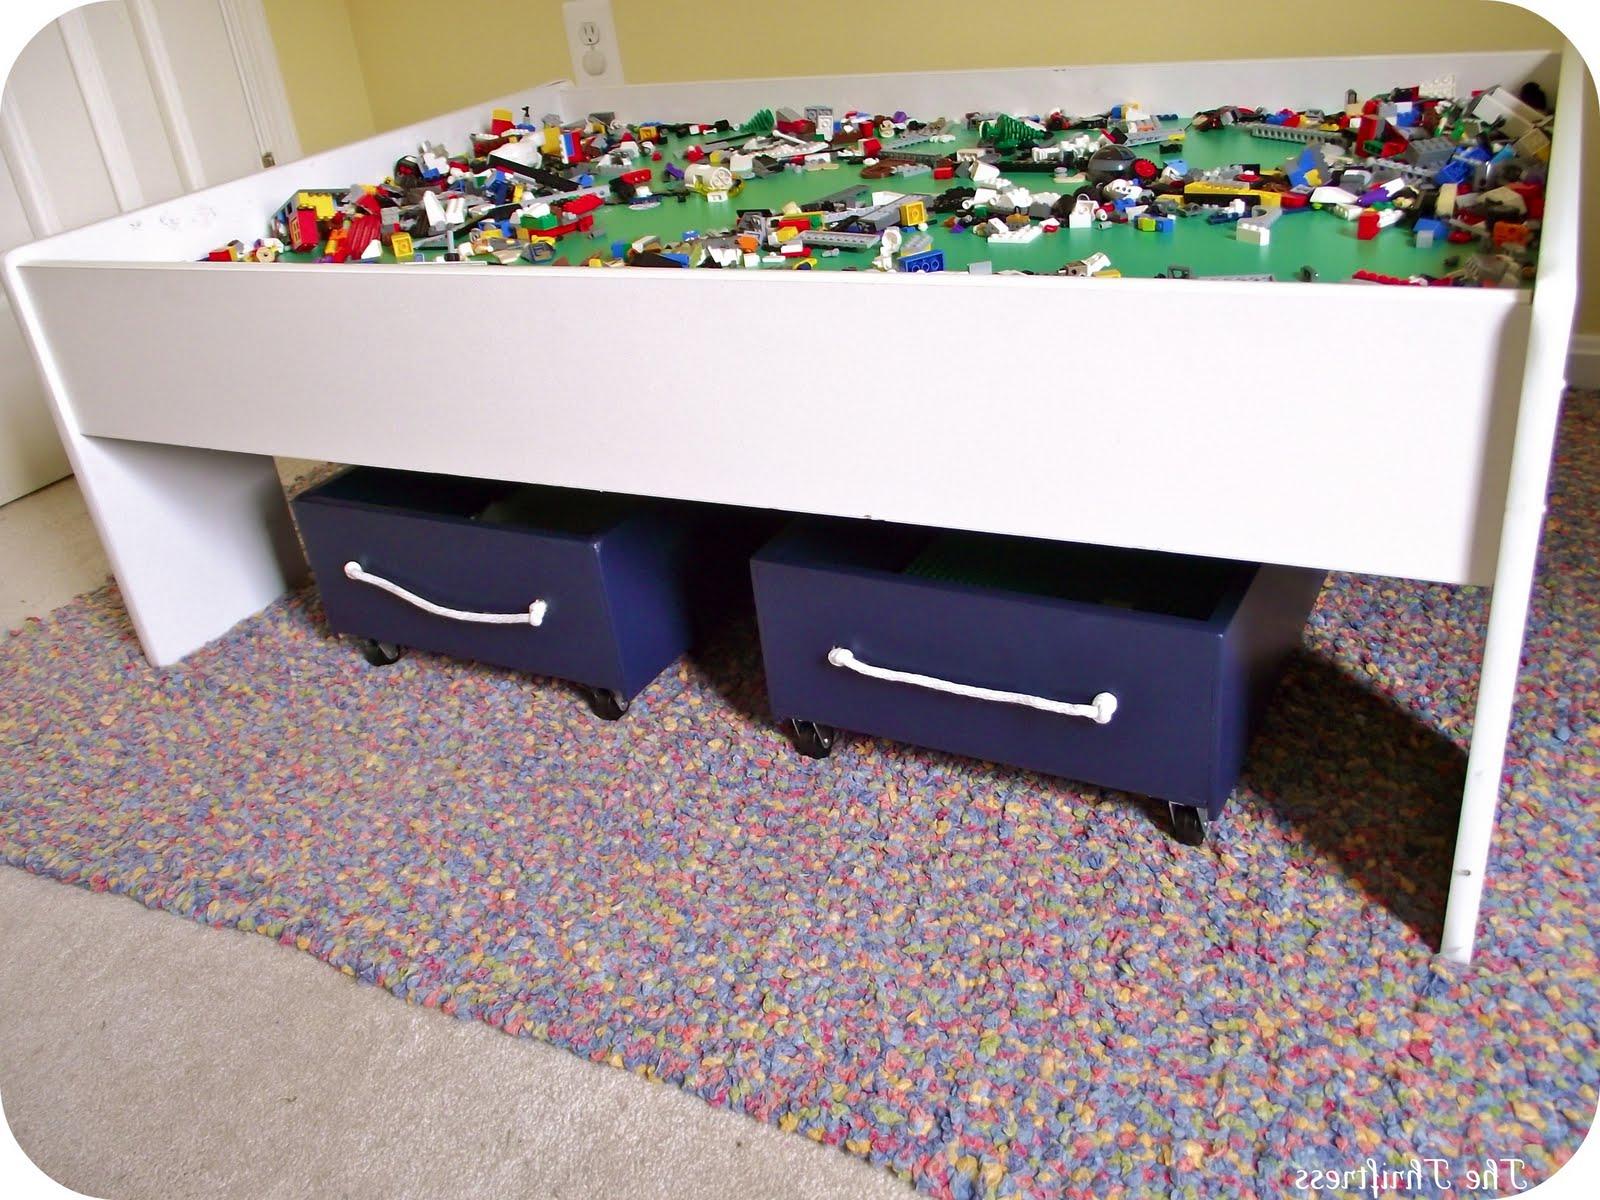 Now we use it as a Lego table